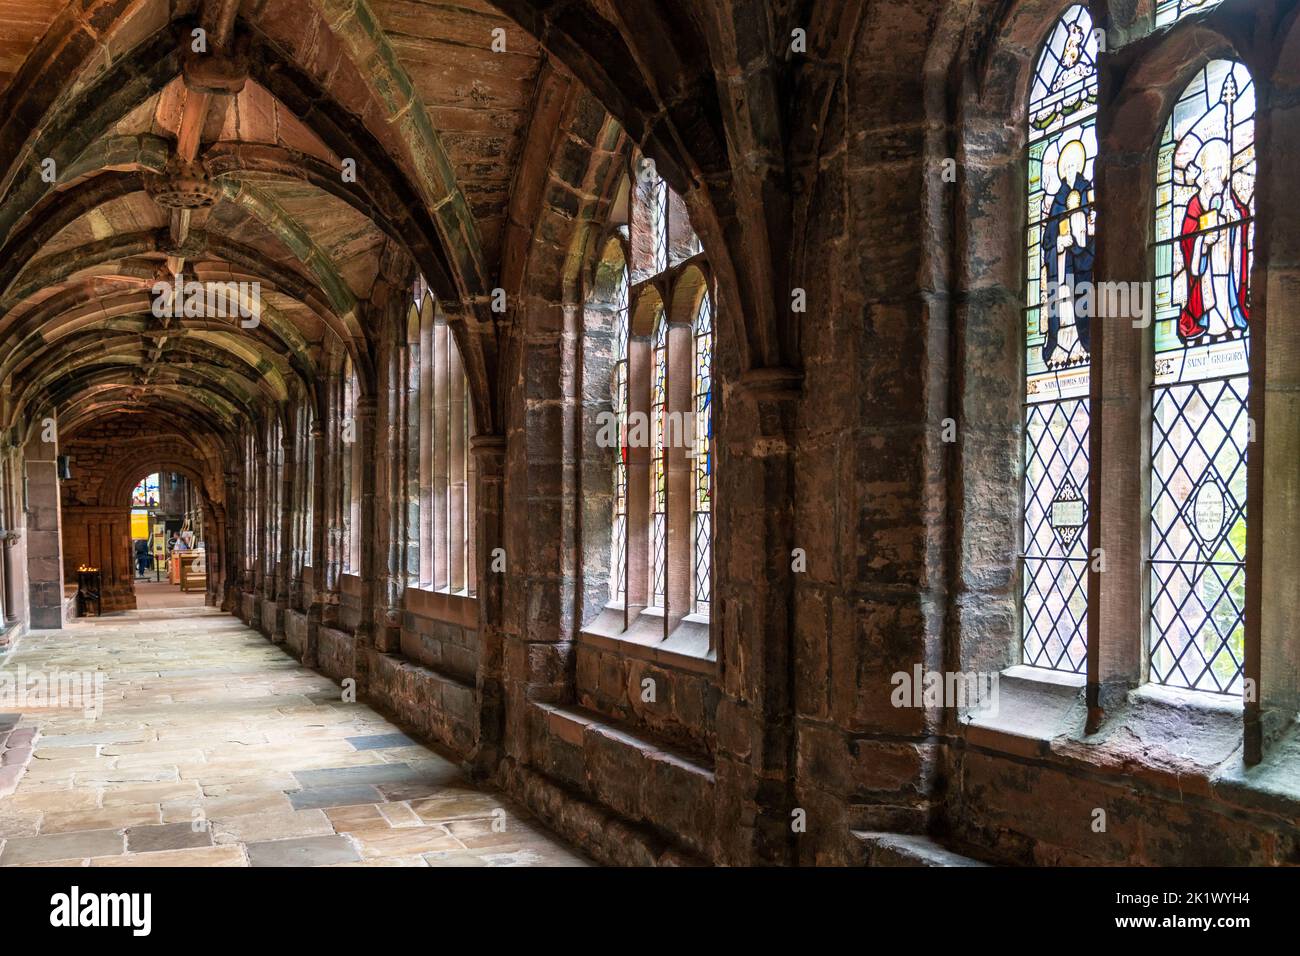 Chester, United Kingdom - 26 August, 2022: view of the cloister hallway in the courtyard of the historic Chester Cathedral with stained glass windows Stock Photo